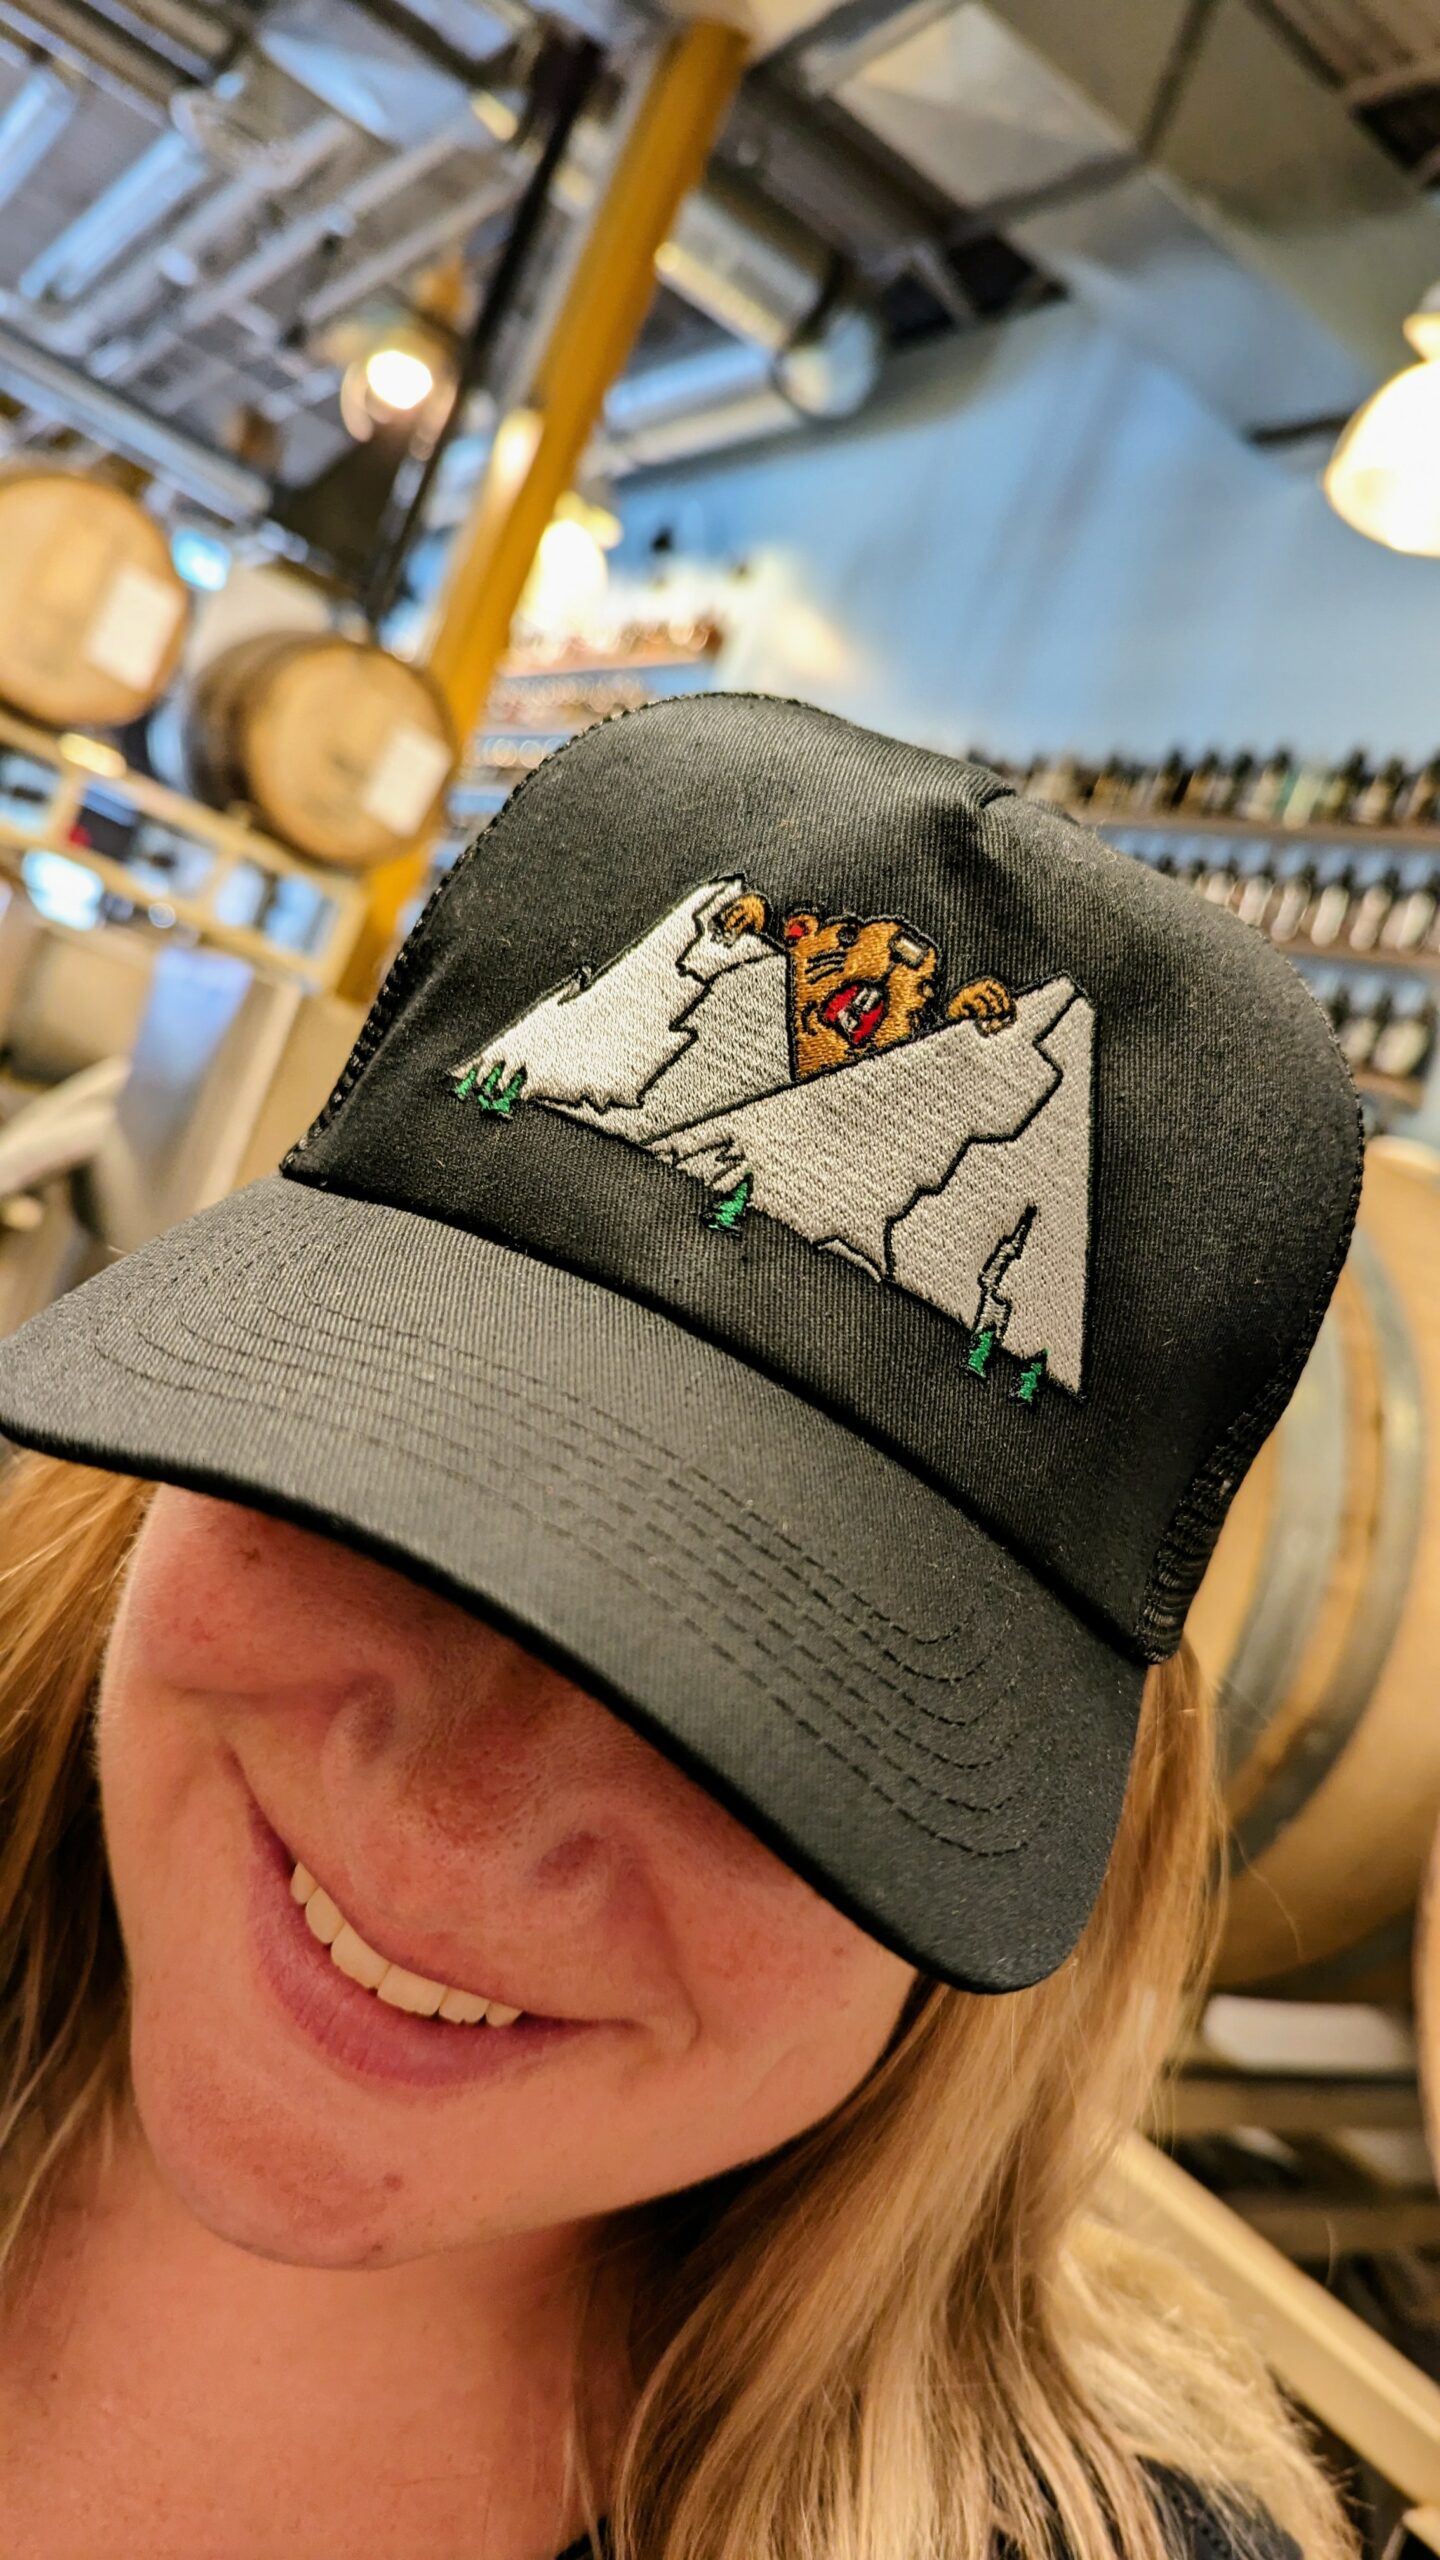 This Prairie Dog® Brewing toque is the perfect addition to any outfit (we think it may even jazz up a suit and tie!. The earth tones are reminiscent of the prairie lands and ingredients used to make the craft beer we all know and love while the slogan gives a nod to your favourite local brewery and lets everyone know what you like.